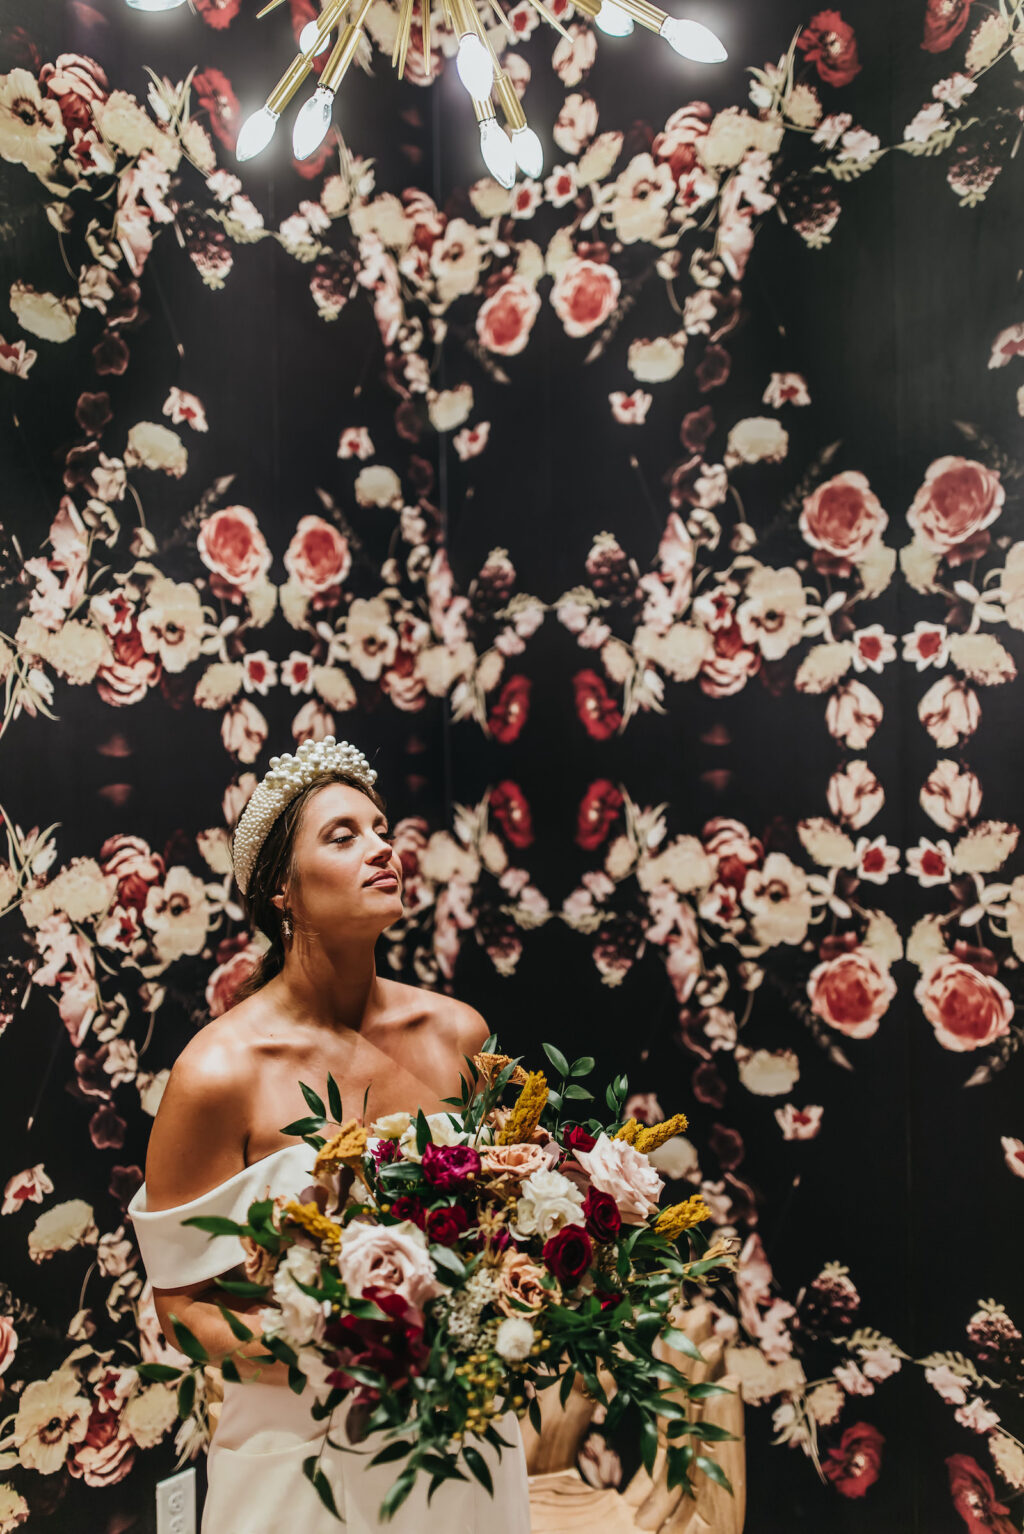 Modern and Edgy Fall Fall Wedding, Floral Black and Red Wall Backdrop, Bride Holding Blush Pink, Burgundy, Greenery and Yellow Floral Bouquet, Bride Wearing Off the Shoulder Wedding Dress and Elaborate Rhinestone Headband